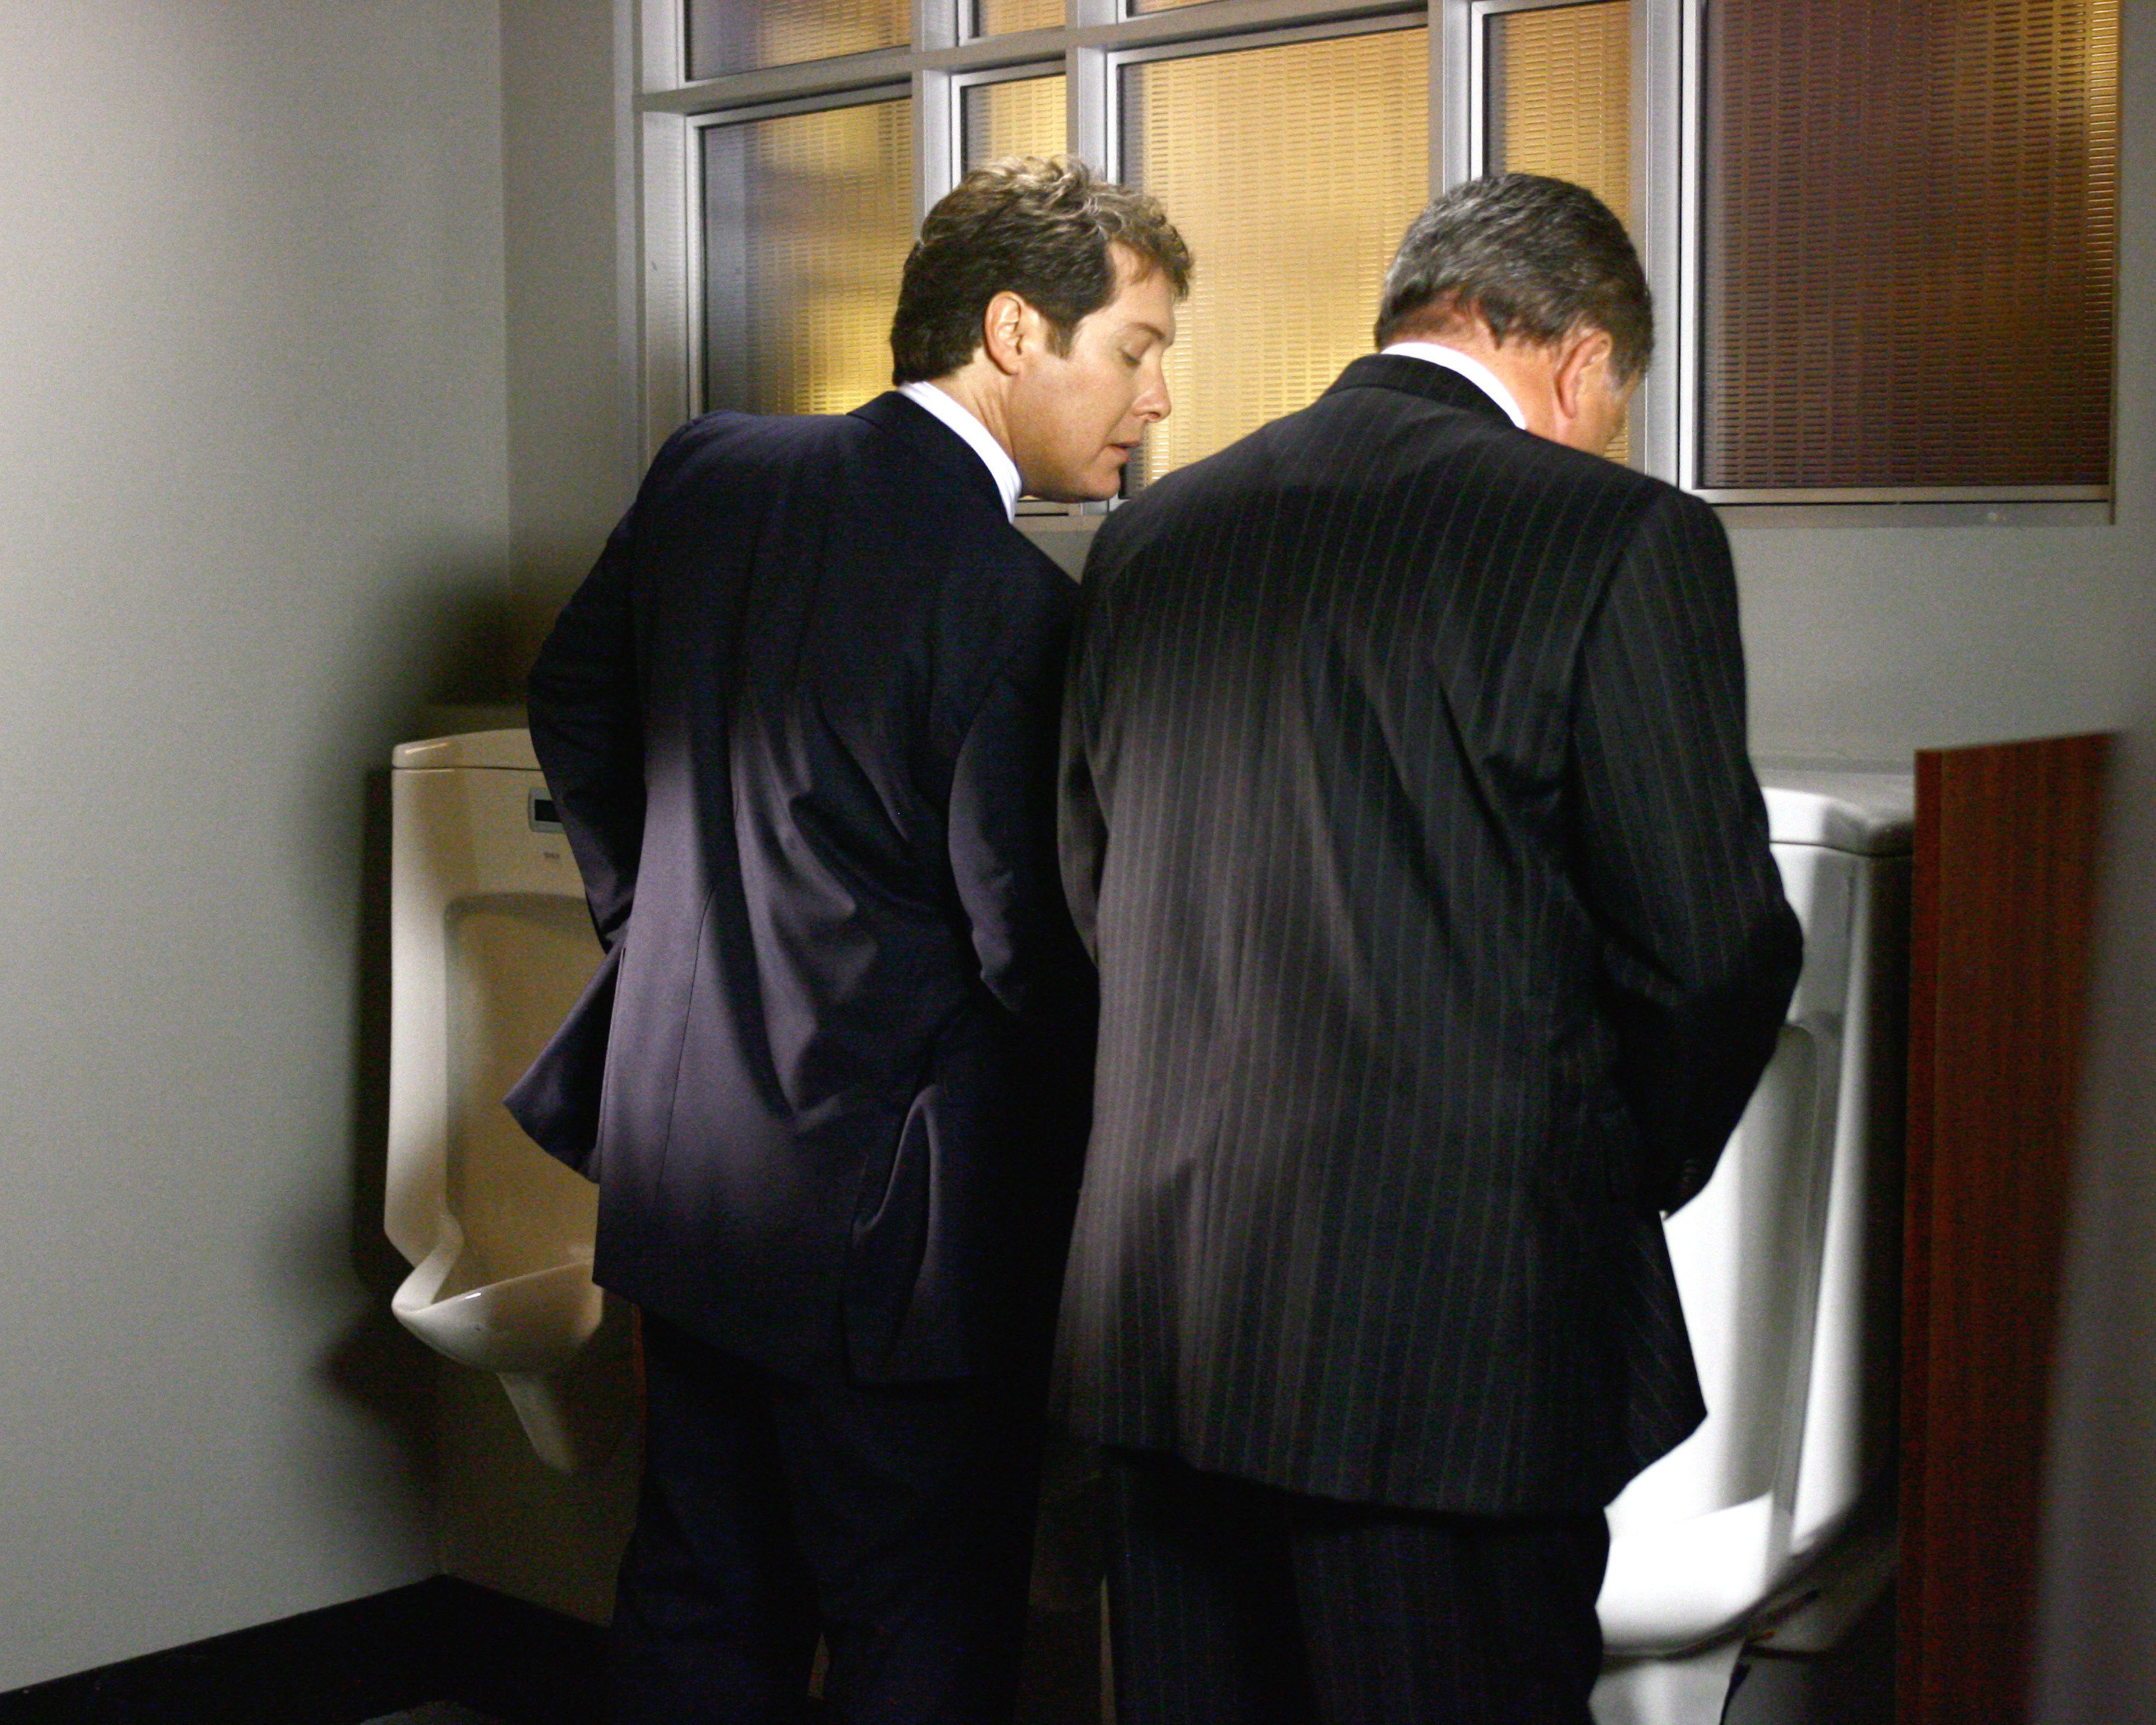 Two men standing at a urinal and one man is looking down at what the other man is doing